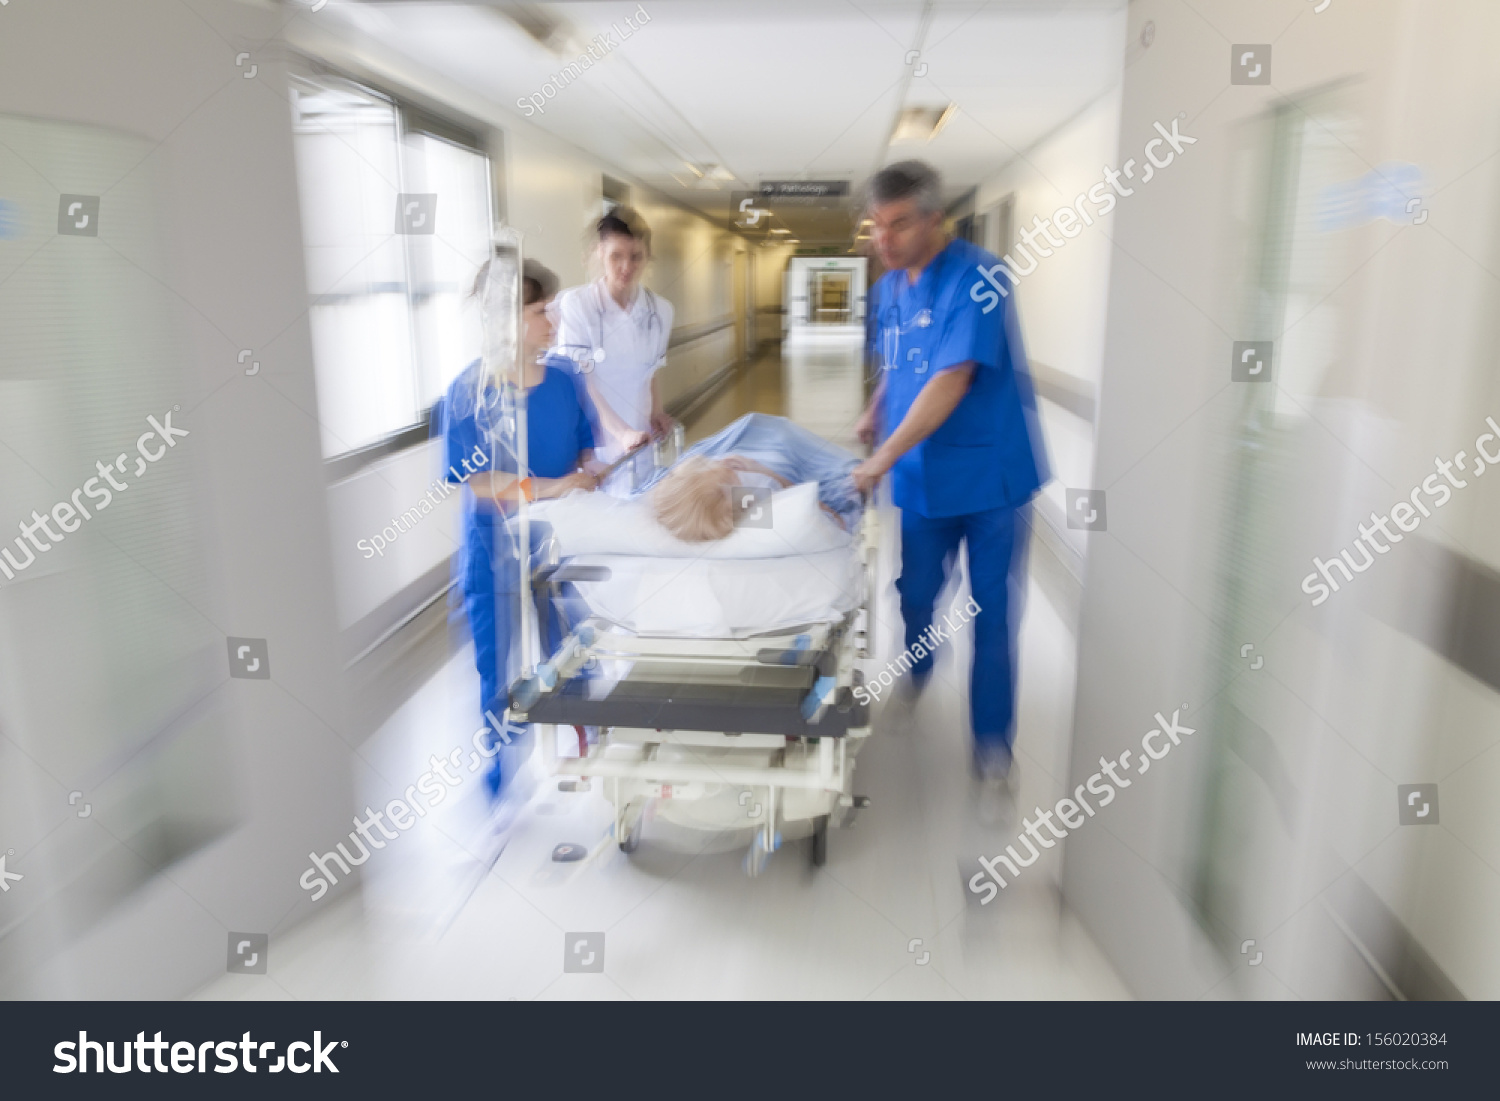 A motion blurred photograph of a patient on stretcher or gurney being pushed at speed through a hospital corridor by doctors & nurses to an emergency room #156020384